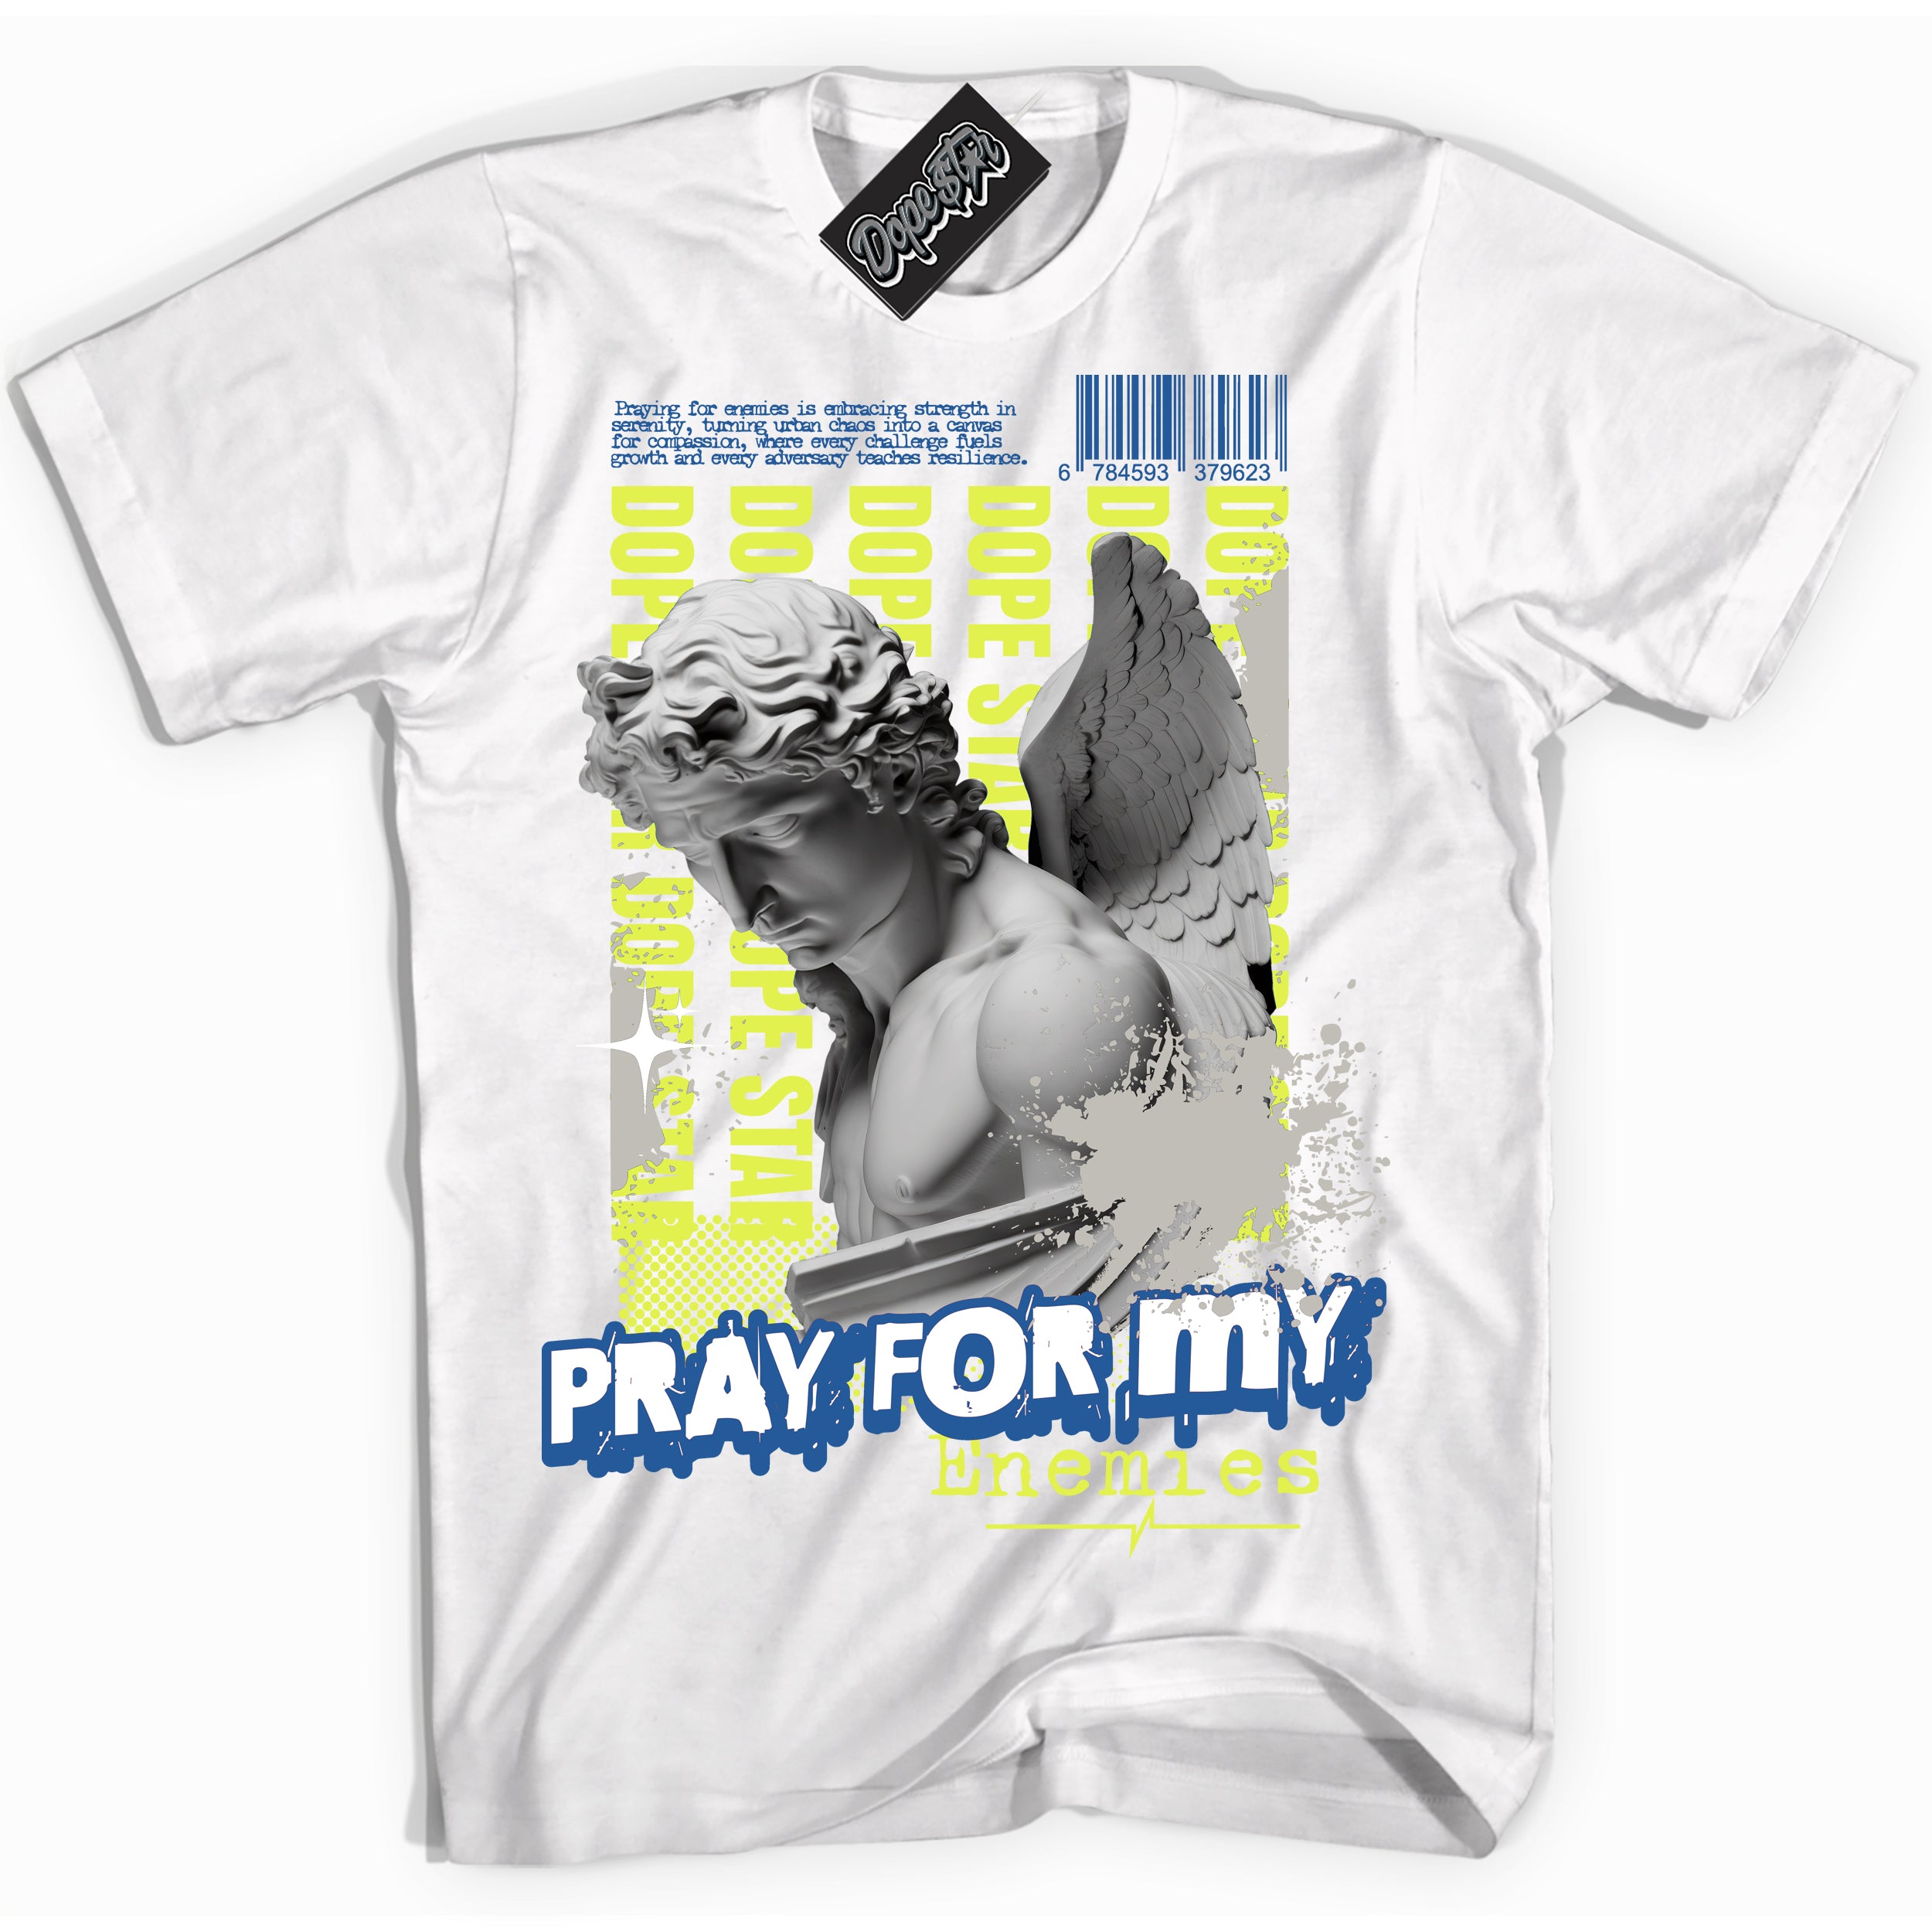 Cool White Shirt with “ Pray Enemies” design that perfectly matches '86 Air Max Day 1s  Sneakers.